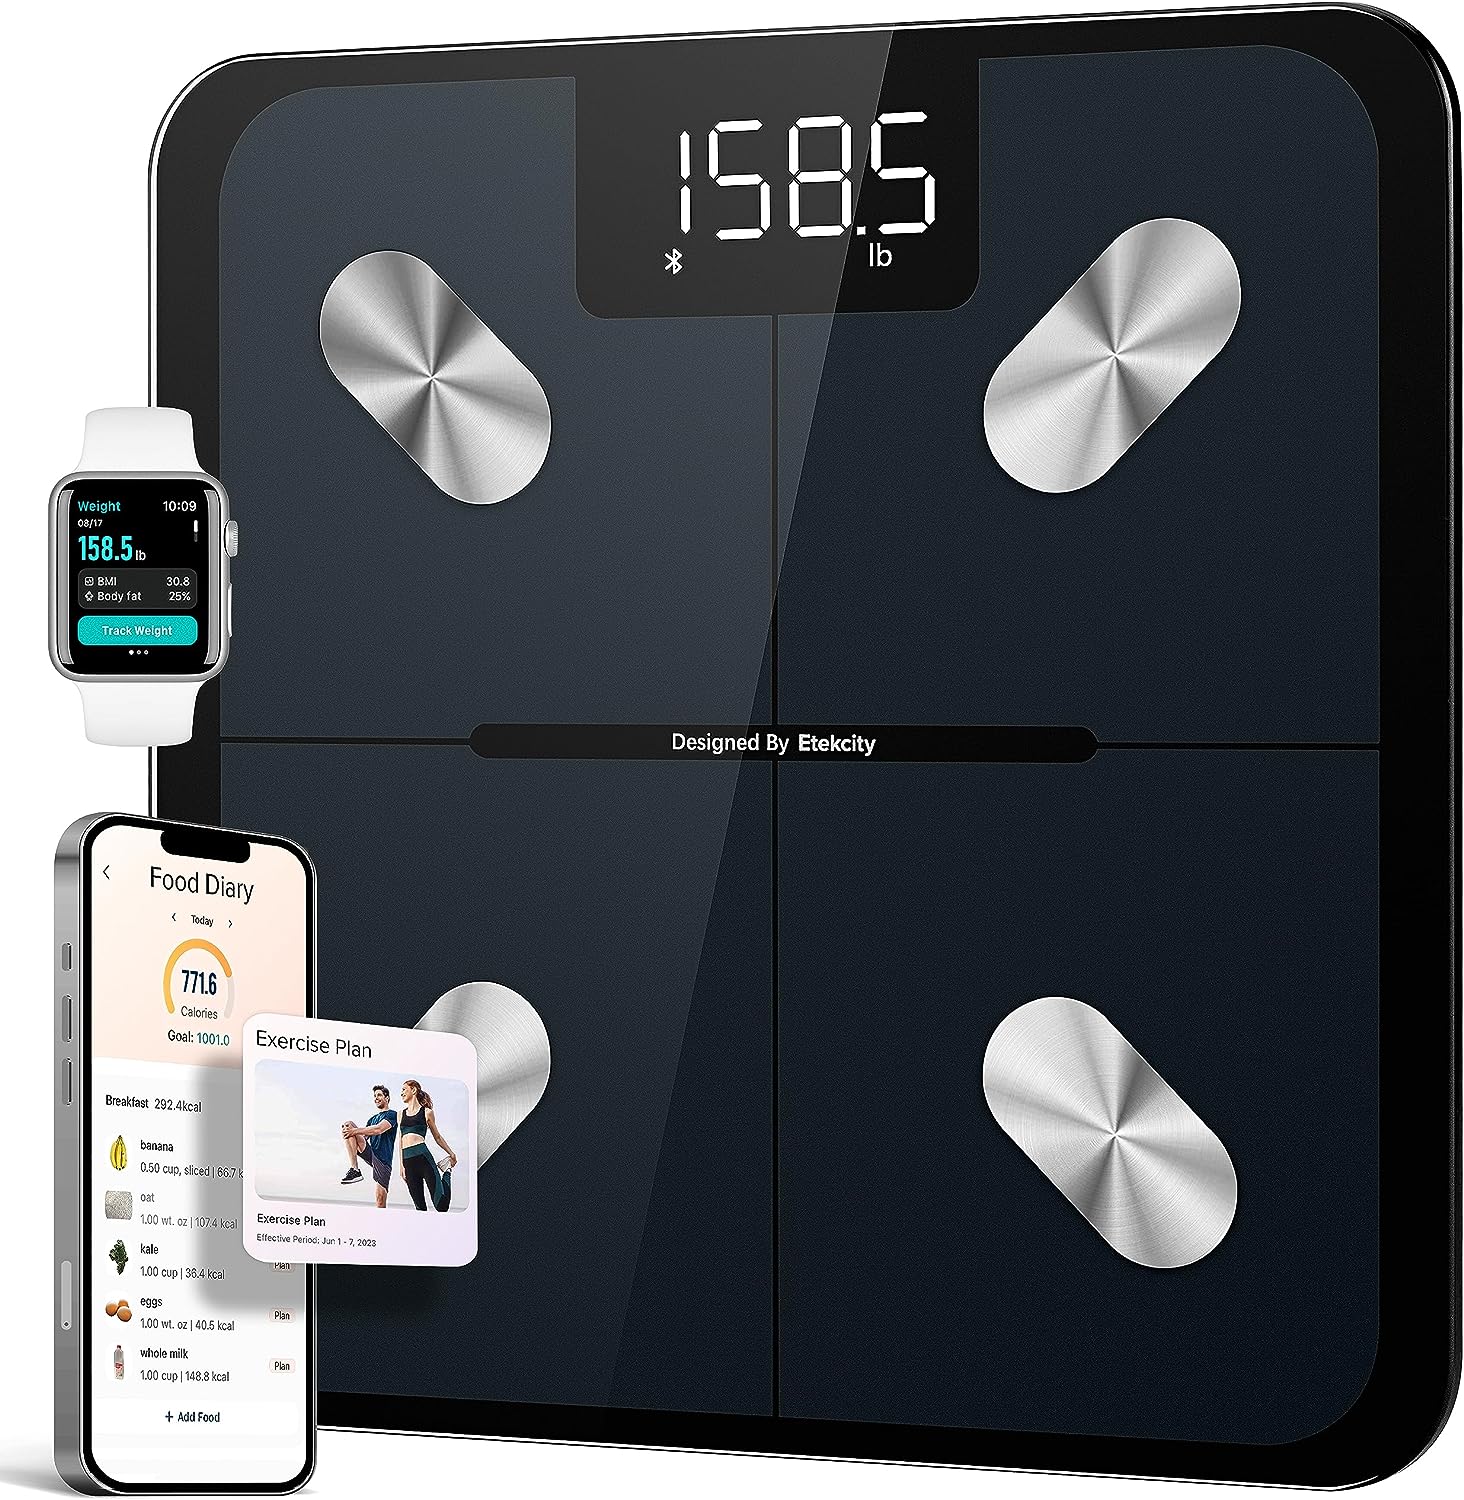 Smart Scale With Accurate Health Equipment - Bathroom Digital Weighing Scale with BMI - Body Fat - Muscle Mass